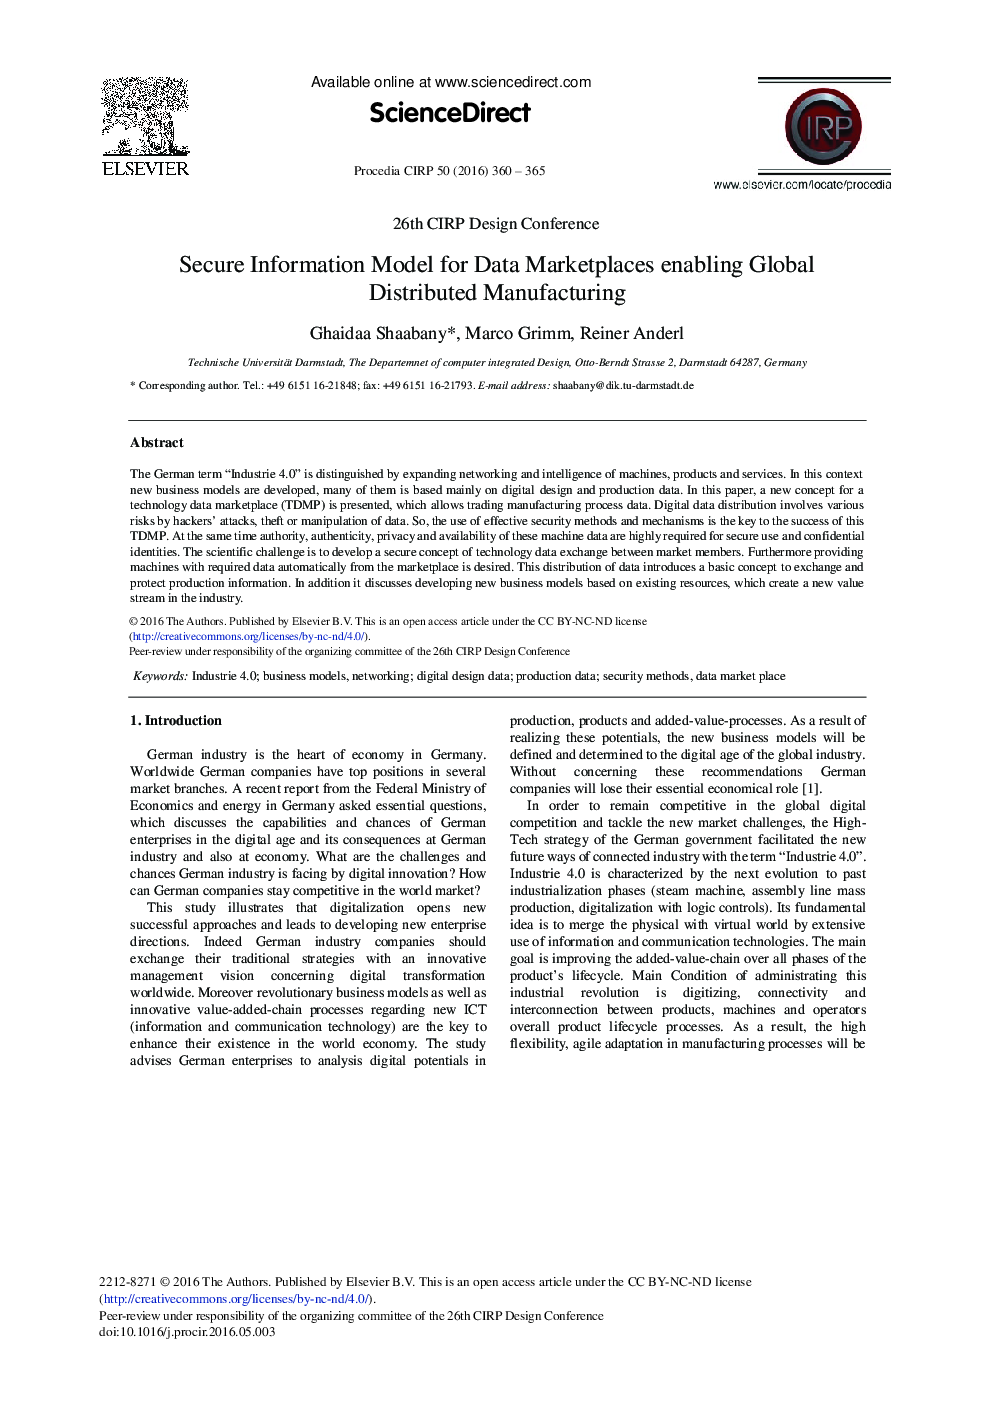 Secure Information Model for Data Marketplaces Enabling Global Distributed Manufacturing 